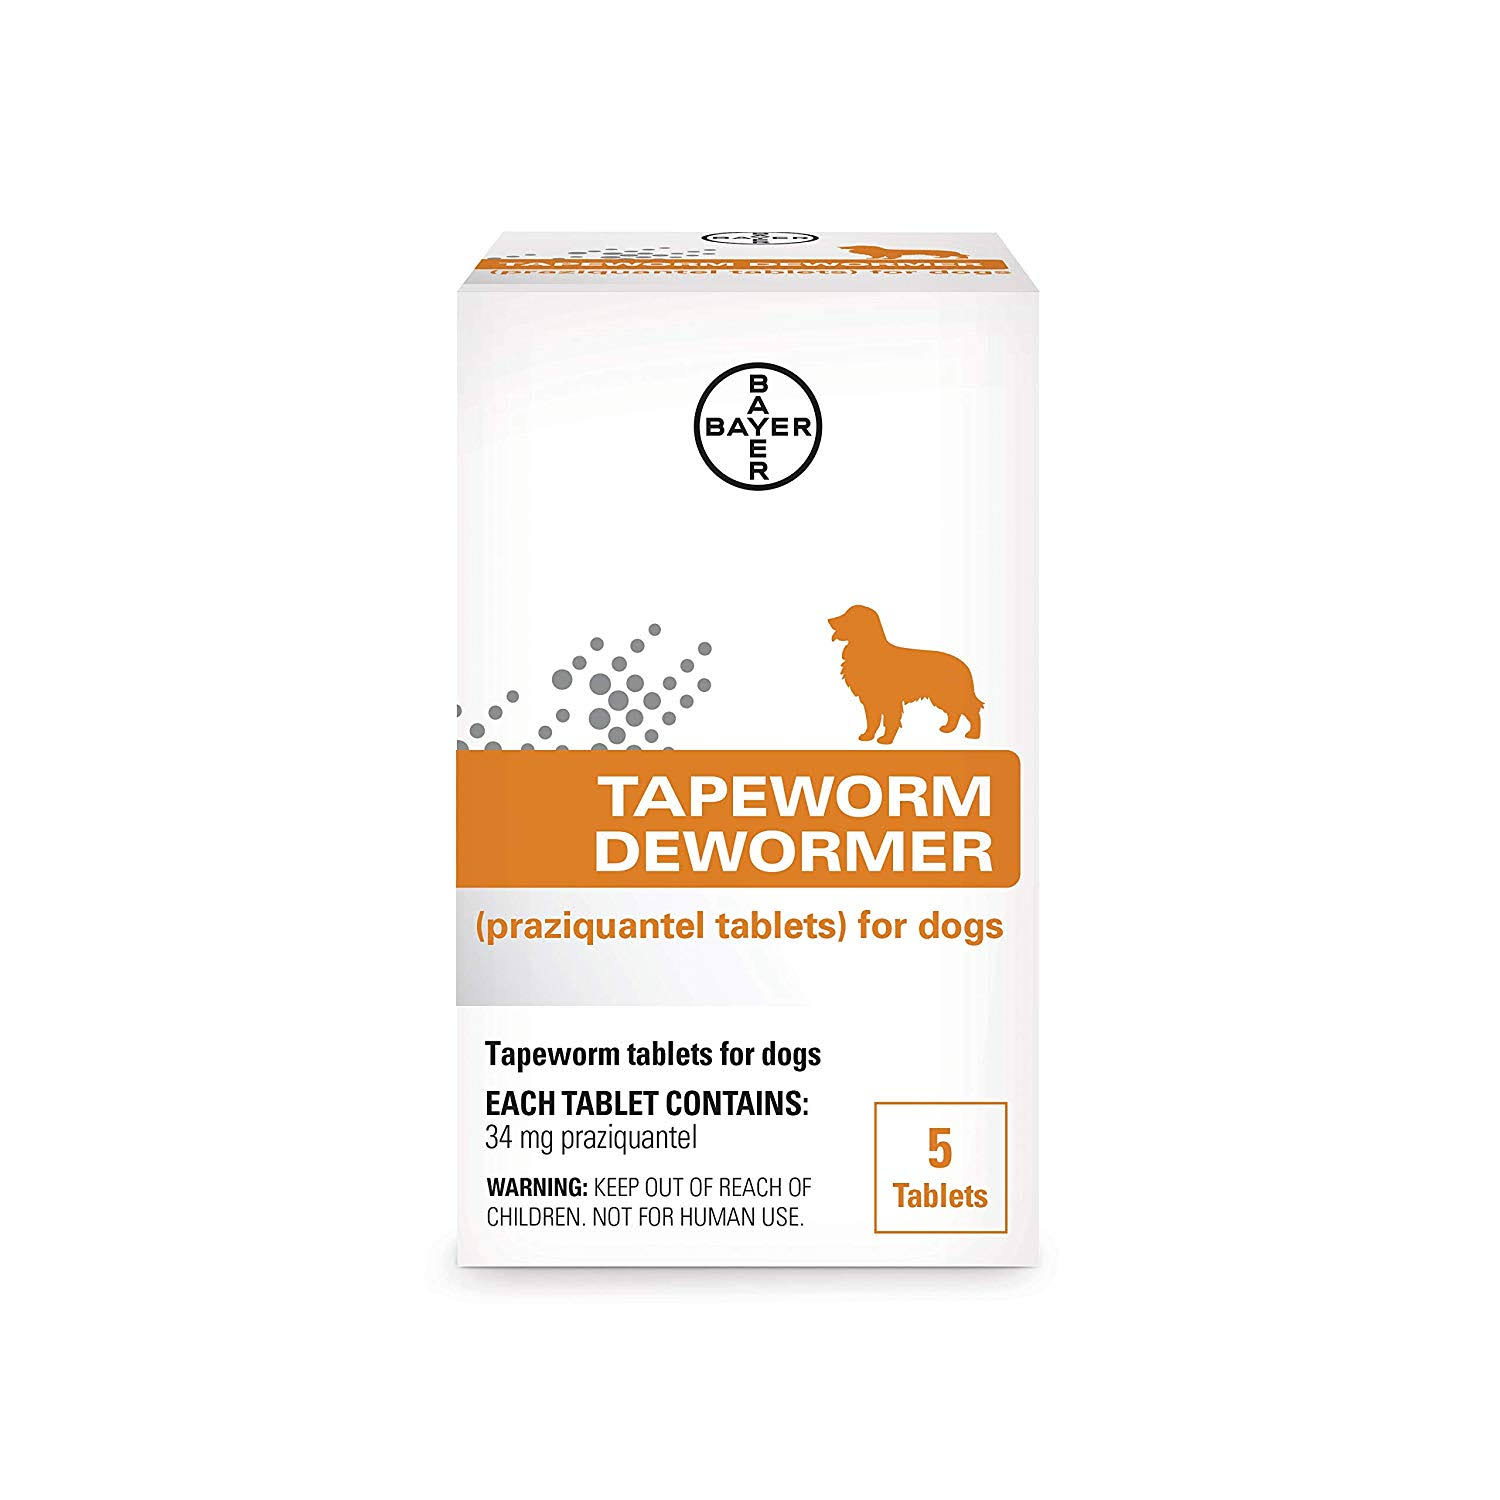 Bayer Expert Care Tapeworm Dewormer Dogs Supplement - 5 Tablets